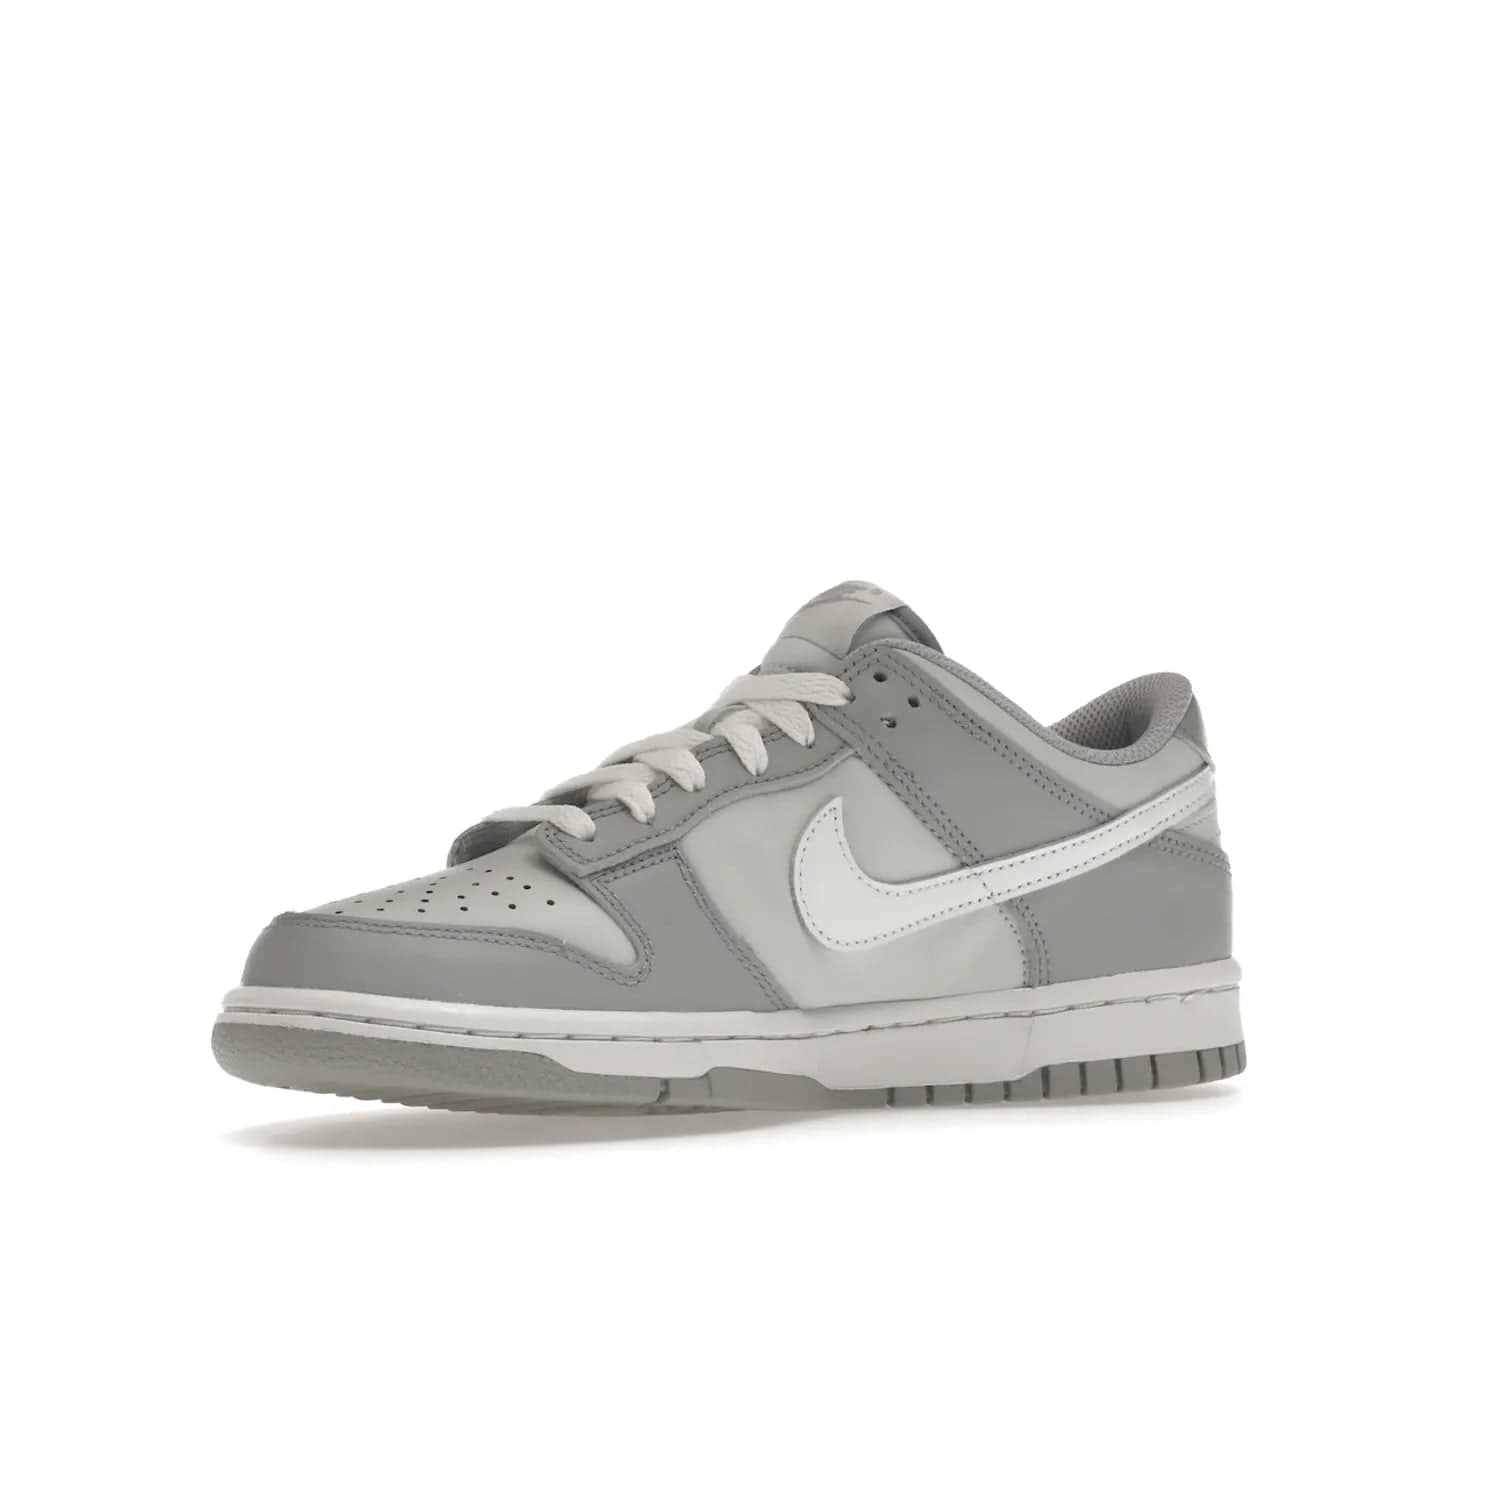 Nike Dunk Low Two-Toned Grey (GS) - Image 16 - Only at www.BallersClubKickz.com - Stylish Nike Dunk Low GS Two-Toned Grey featuring leather build, light/dark grey shades, white Swoosh logo & gray rubber outsole. Get ready to make a statement with this timeless classic released in March 2022.